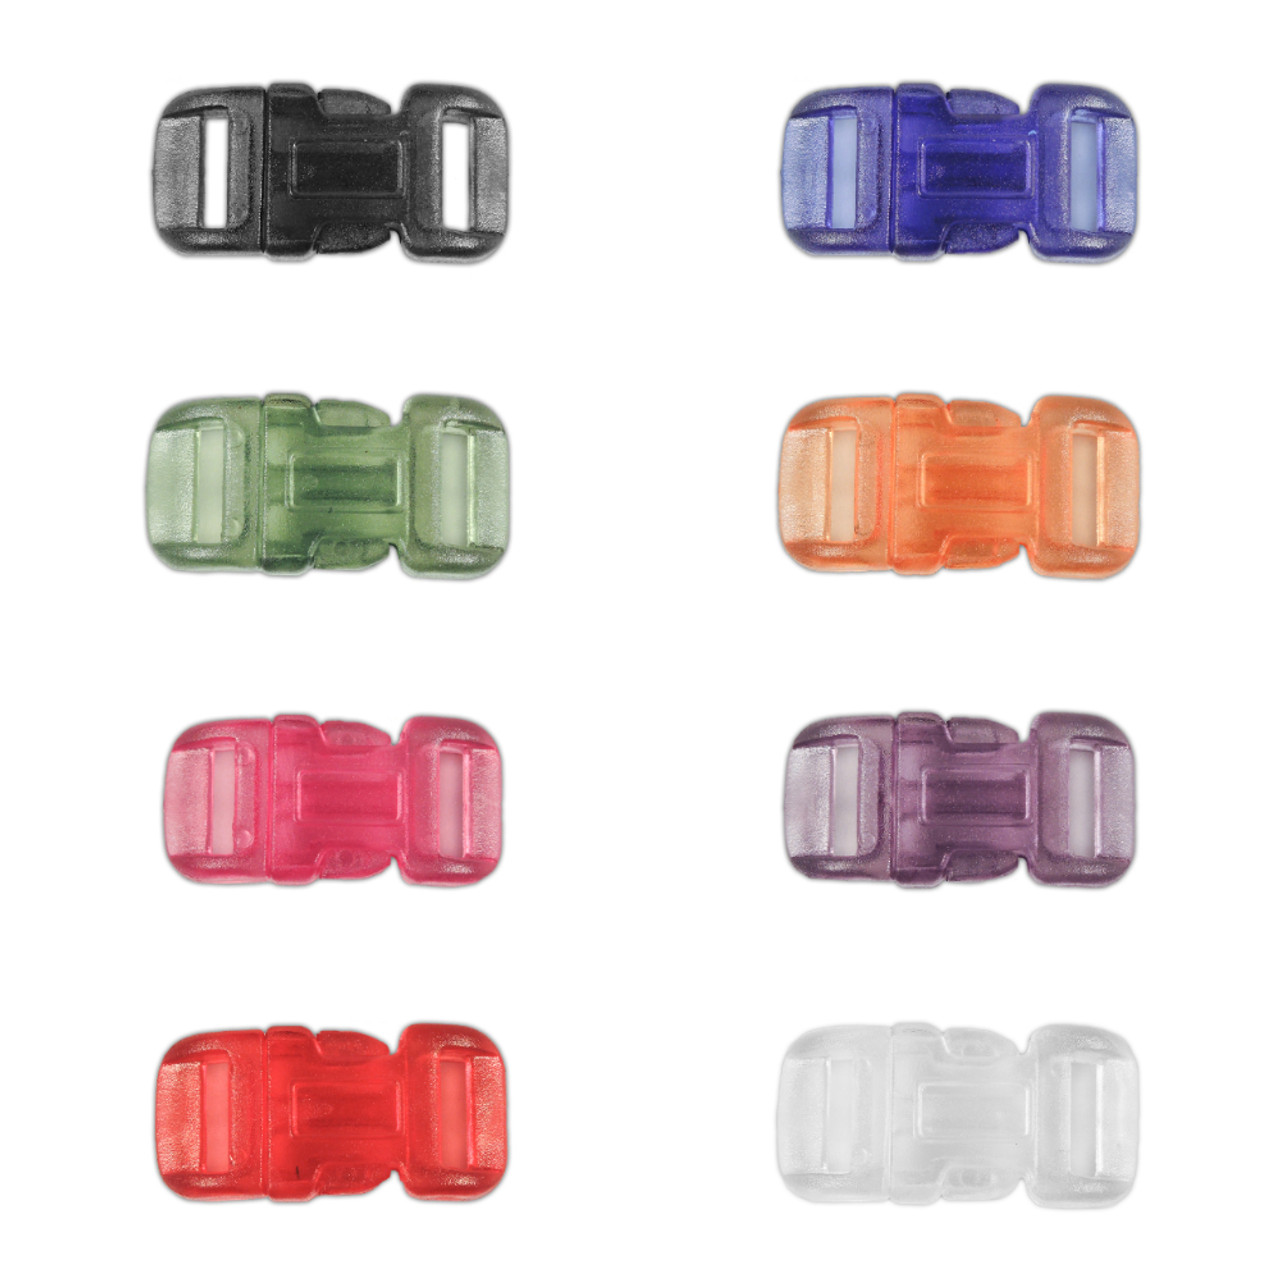 12 Packs: 8ct. (96 total) Plastic Paracord Buckles by Creatology